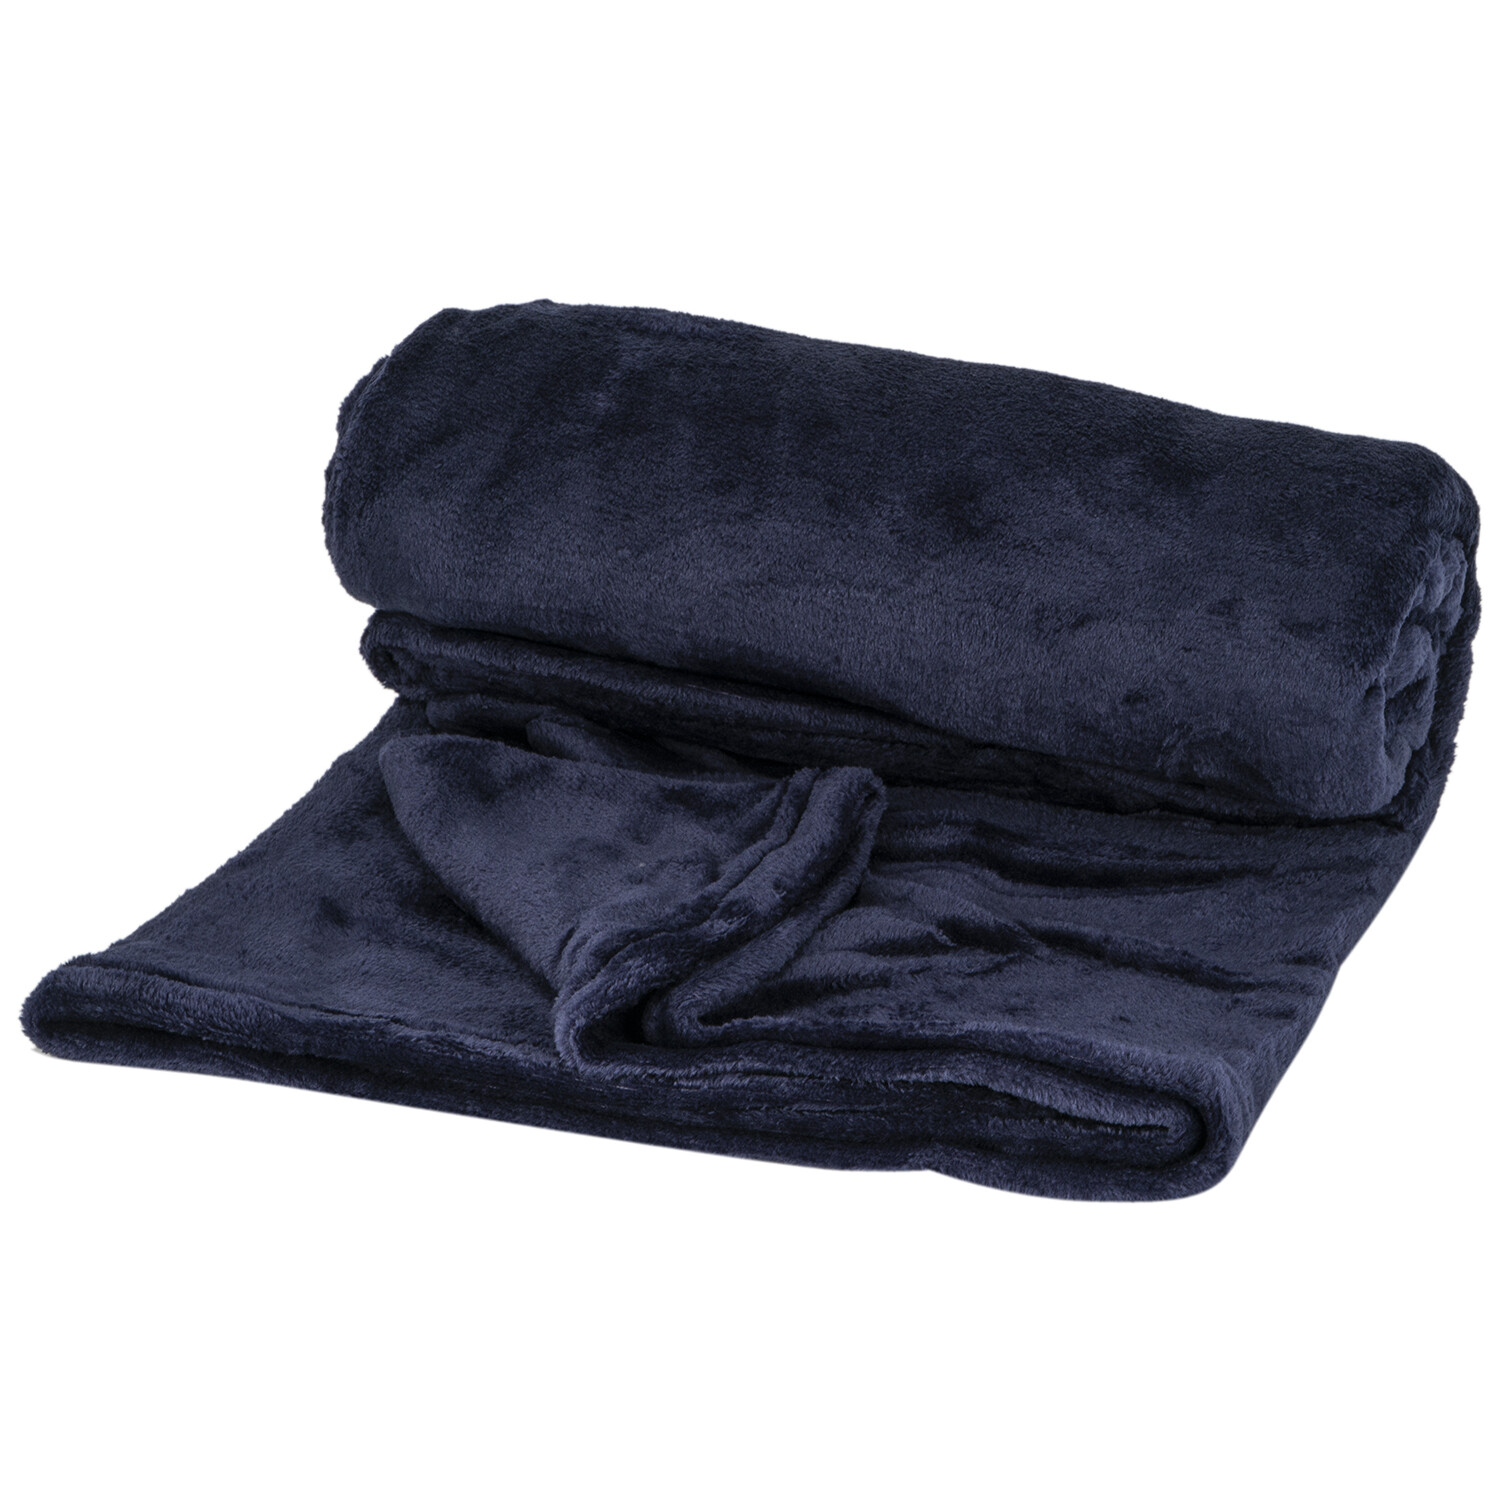 Divante Navy Supersoft Extra Large Throw Image 1